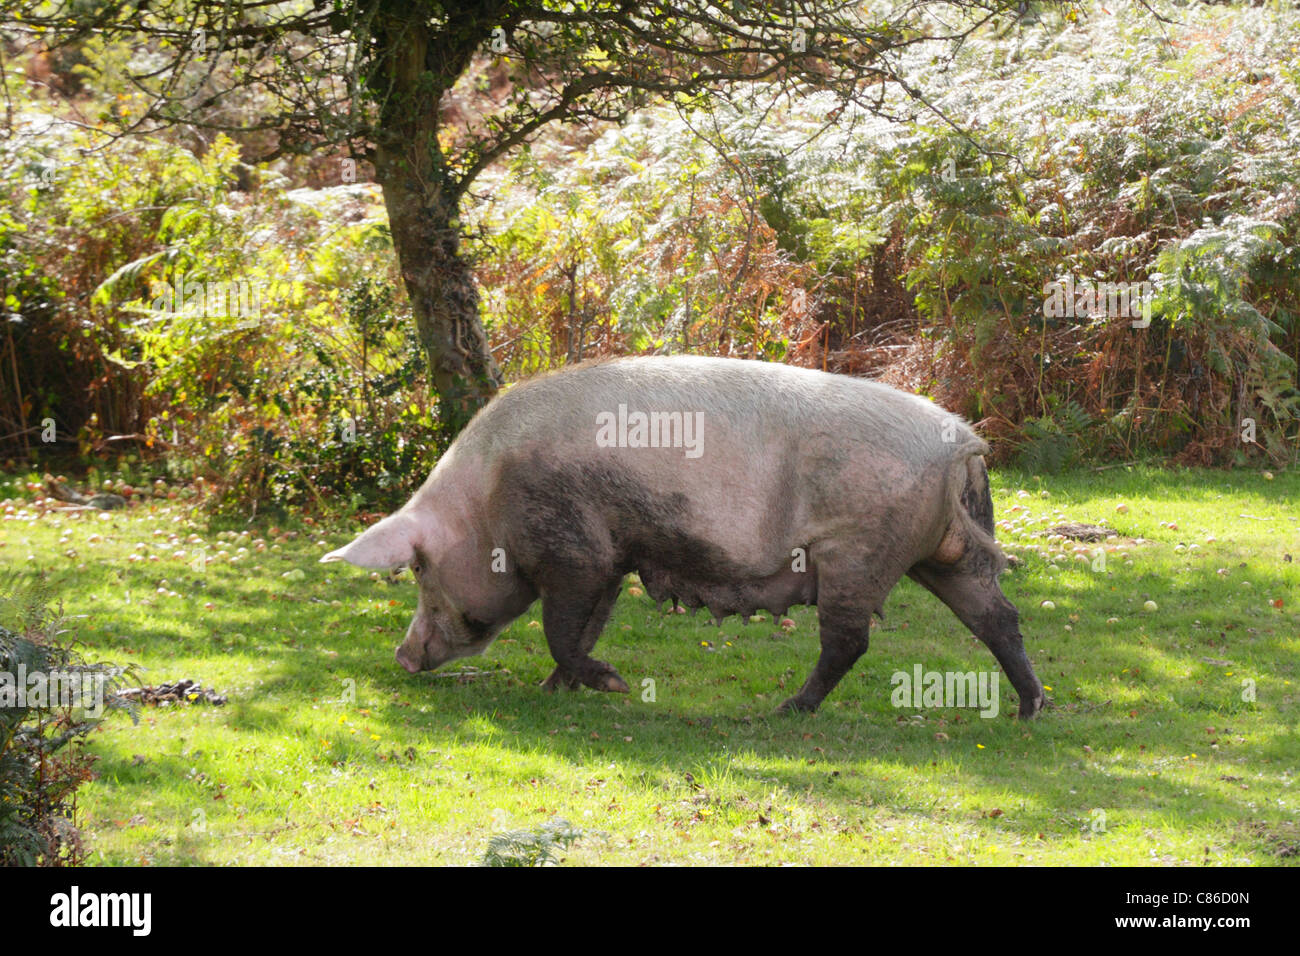 Breeding sow roaming free and foraging for acorns and fallen fruit during two months autumn pannage season in New Forest. Stock Photo